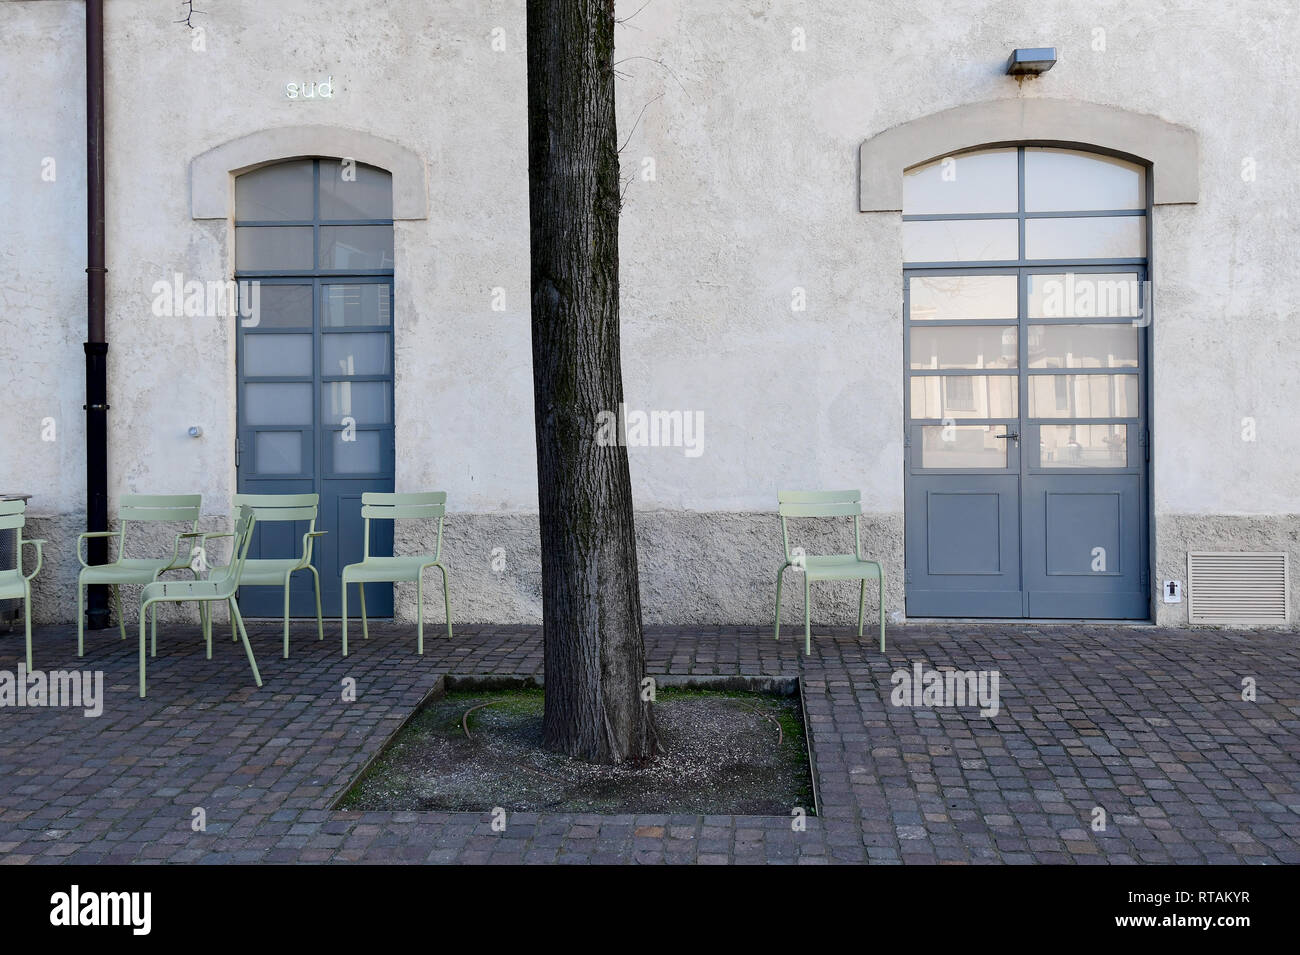 A detail of one of the courtyards of the Fondazione Prada cultural complex, Milan, Italy Stock Photo